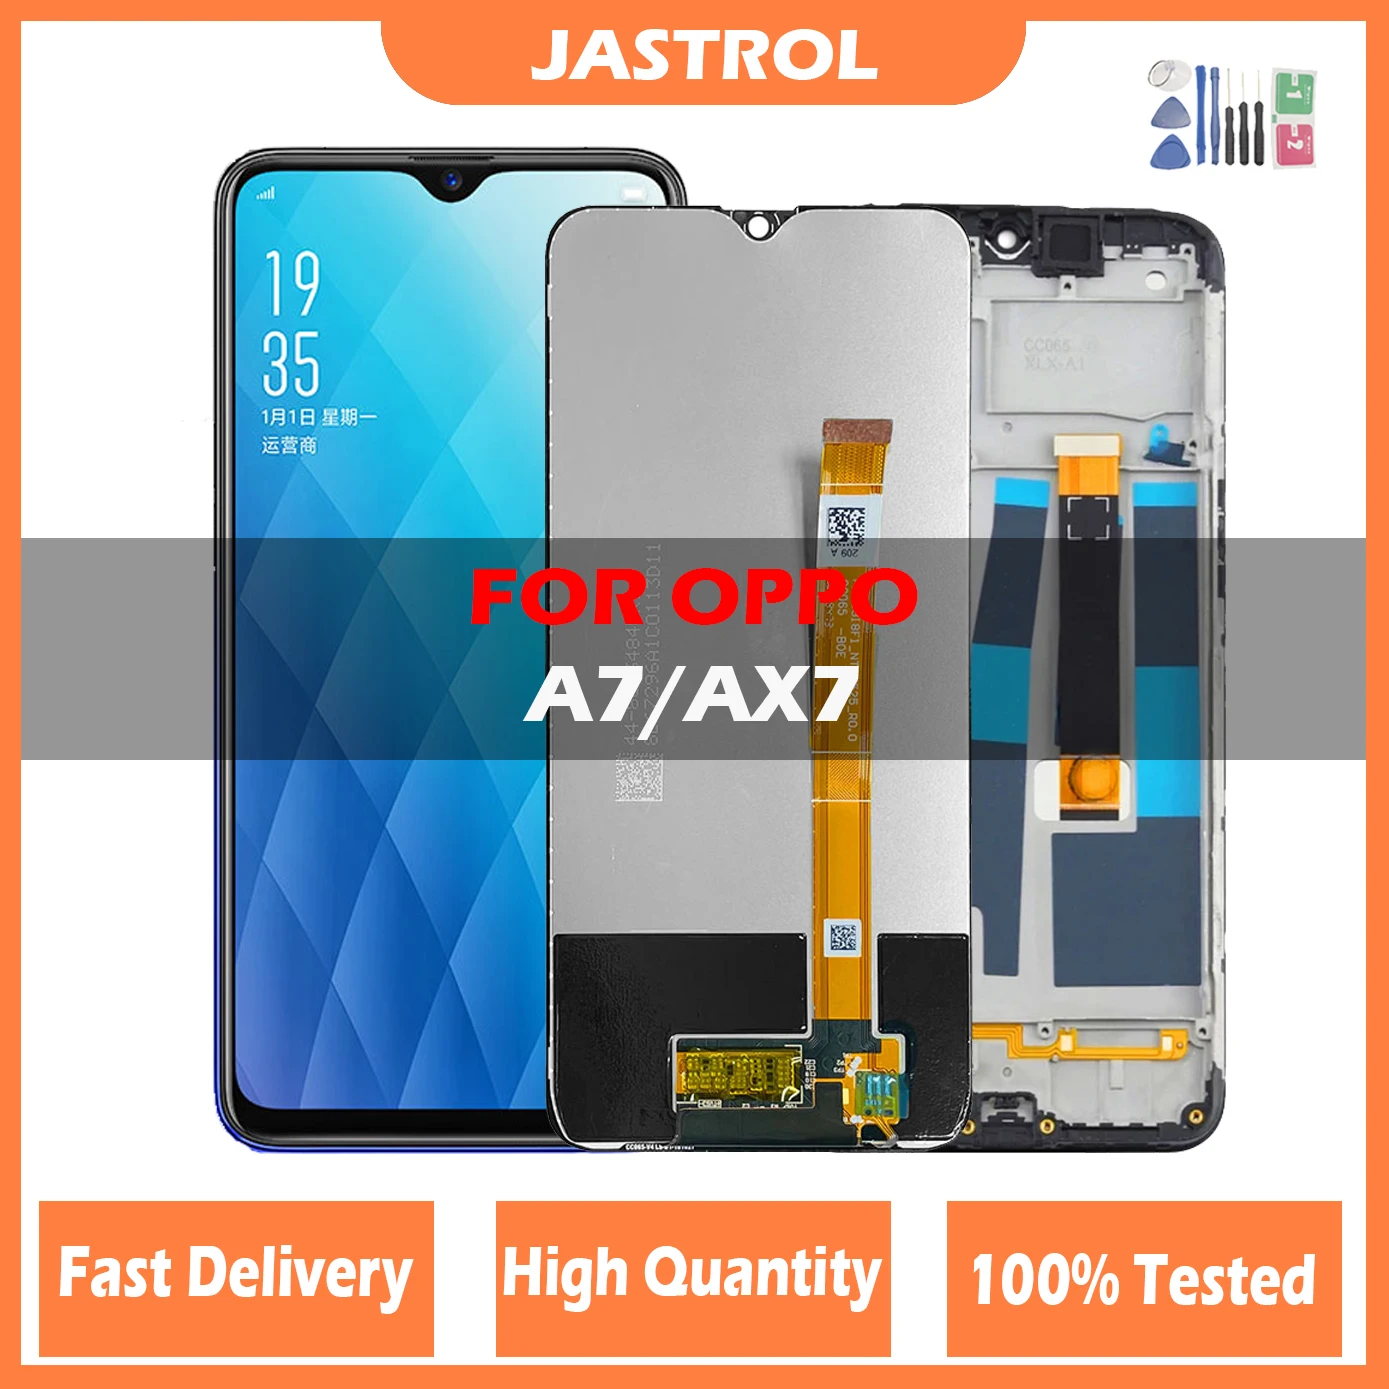 

Original 6.2" For OPPO A7 / AX7 LCD Display Touch Screen panel Digitizer Assembly Replacement For OPPO A7 CPH1901, CPH1903 LCD